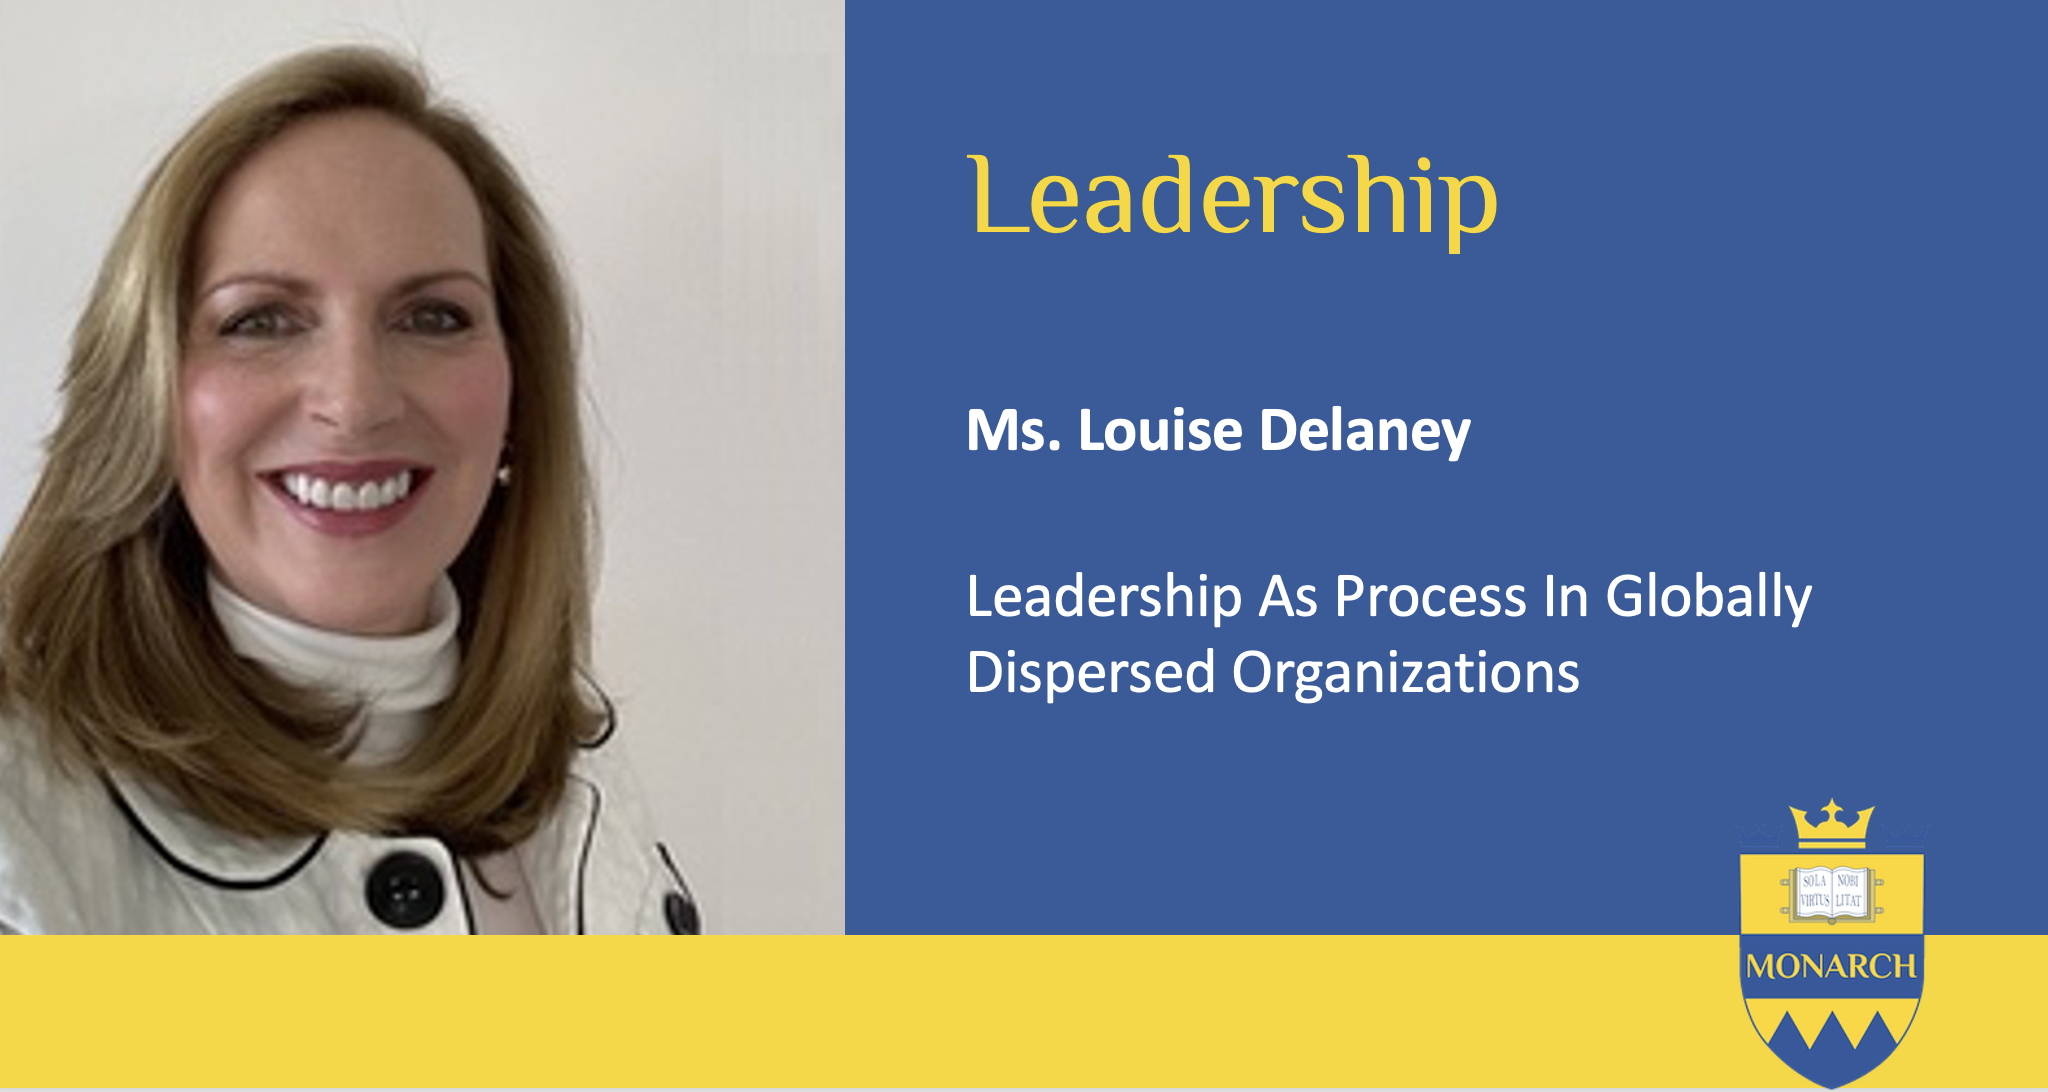 Leadership As A Process In Globally Dispersed Organizations